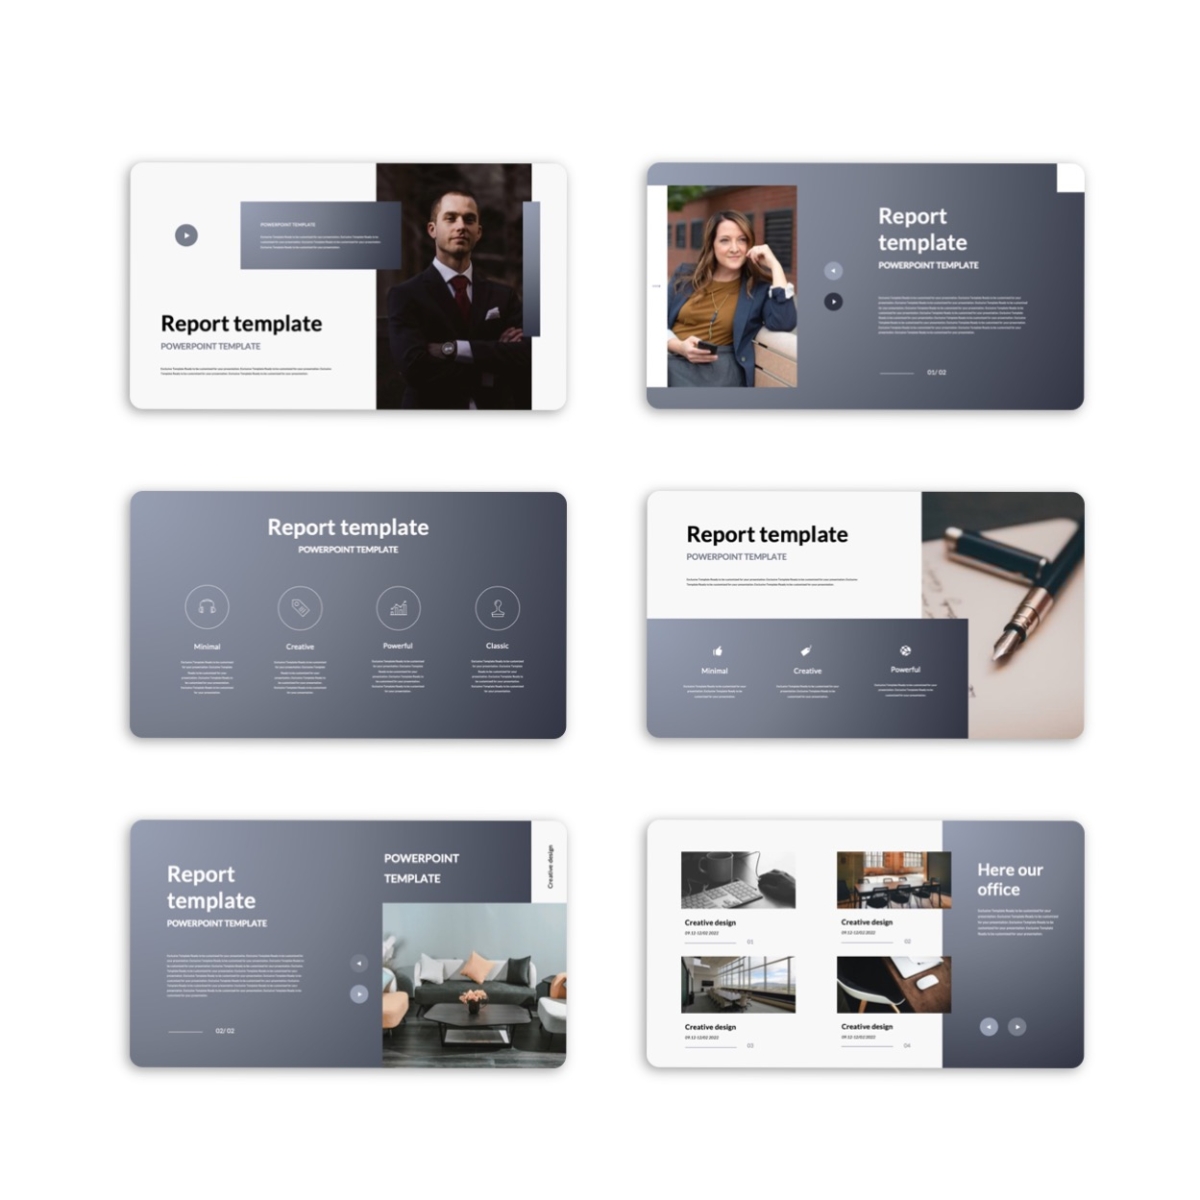 Brand Clean Business Presentation Template